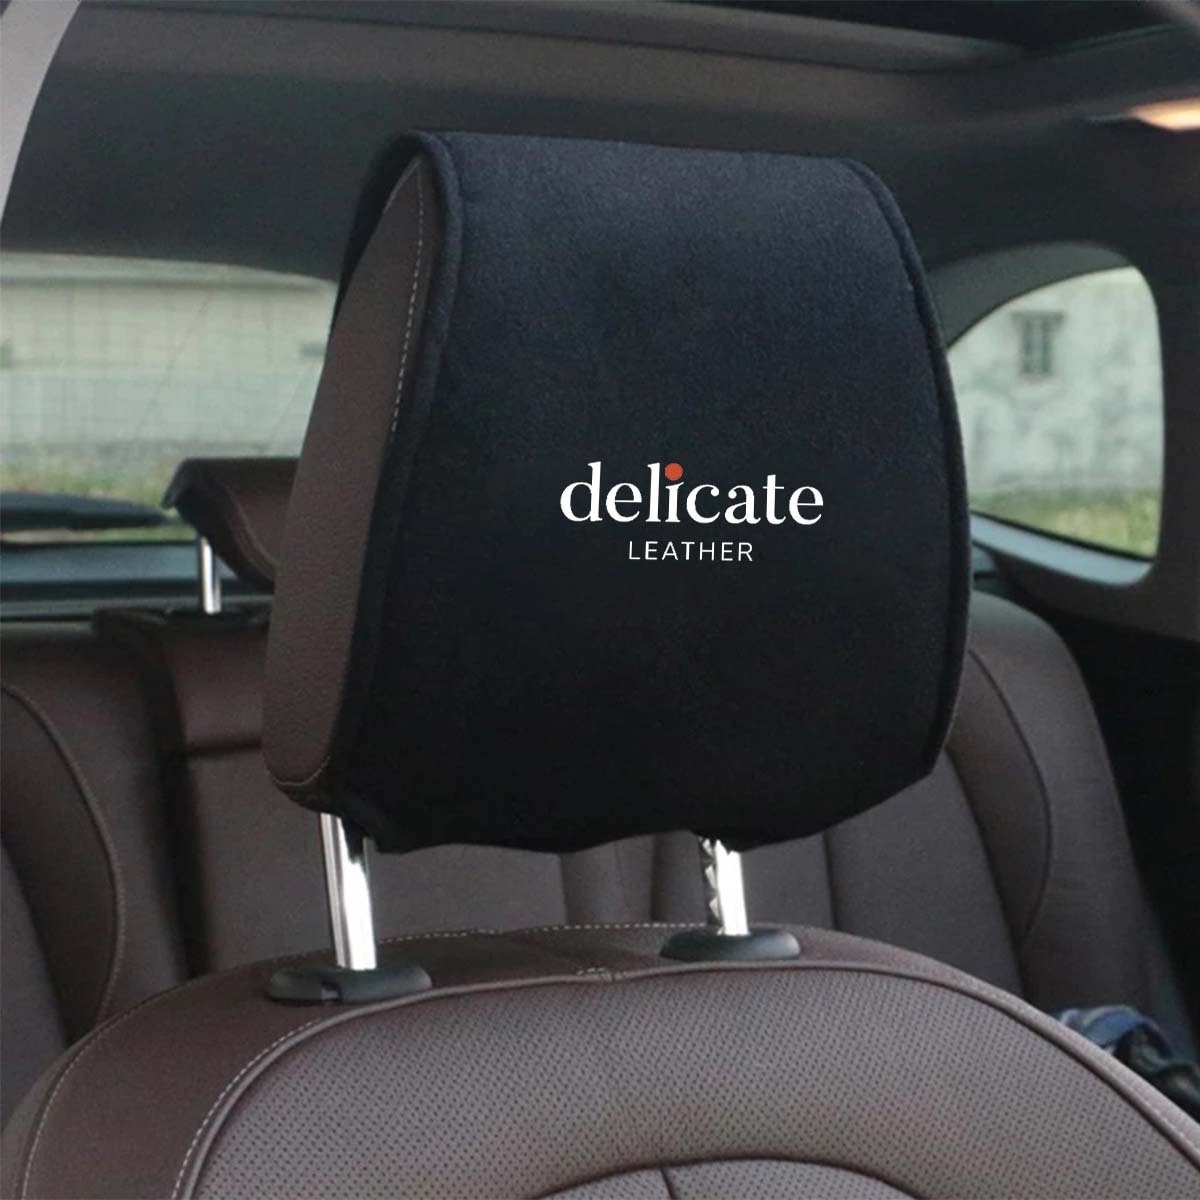 Hyundai Car Seat Headrest Cover: Stylish Protection for Your Vehicle's Headrests